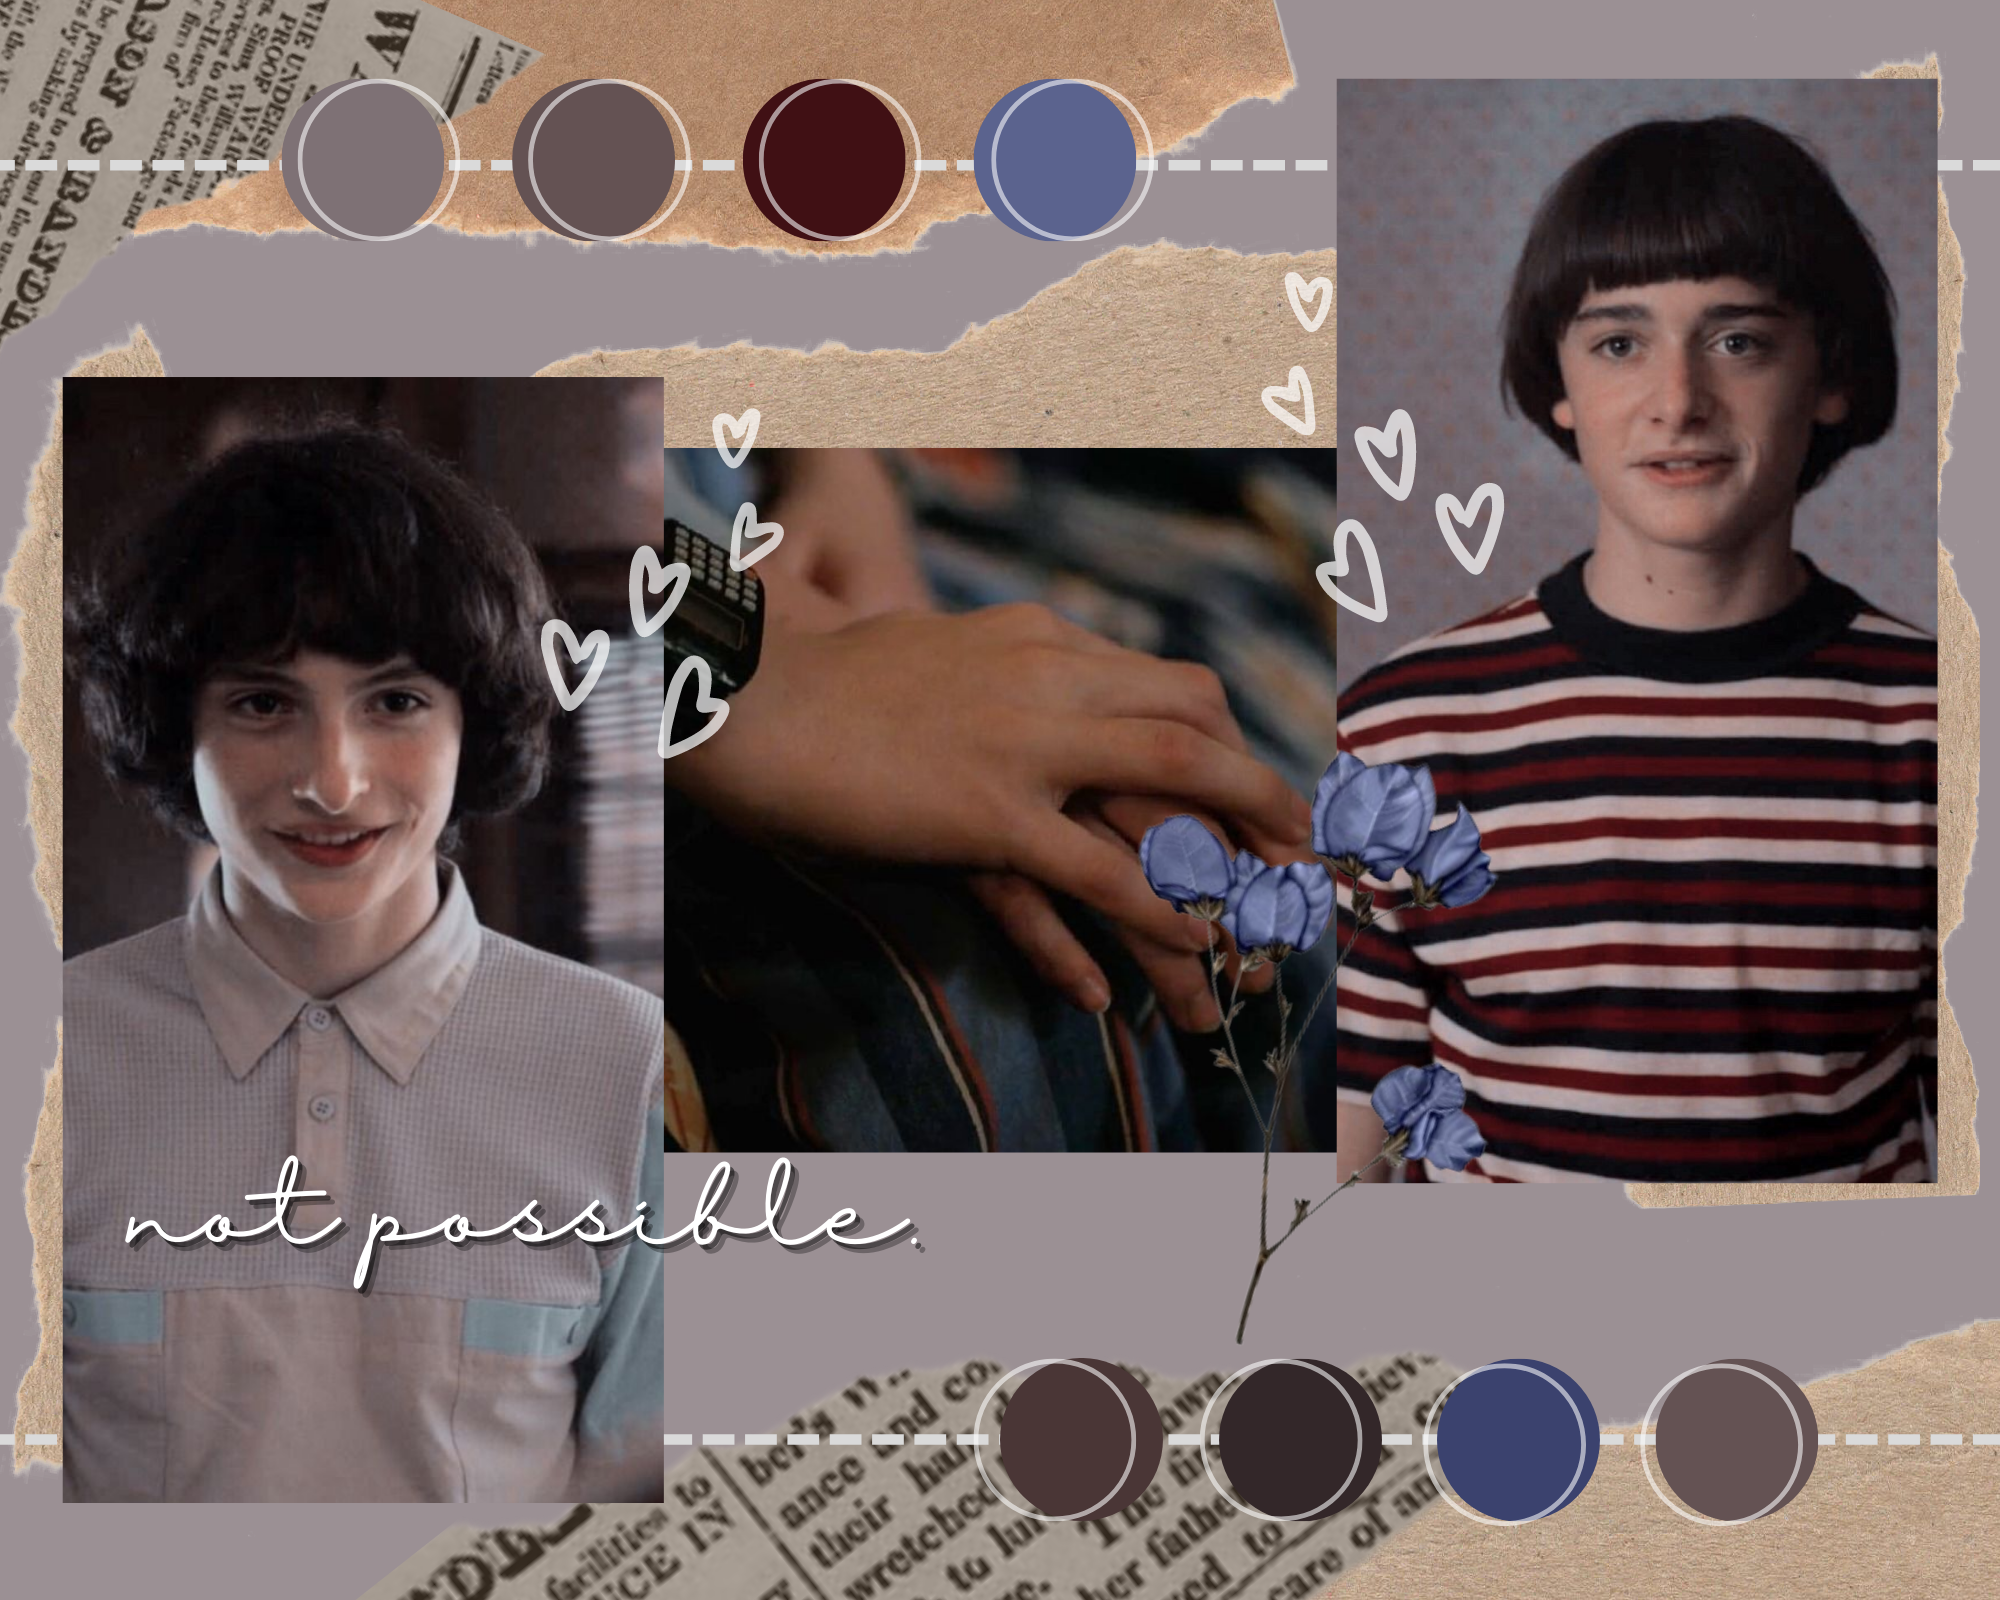 Will Byers Icon  Stranger things aesthetic, Stranger things actors, Stranger  things